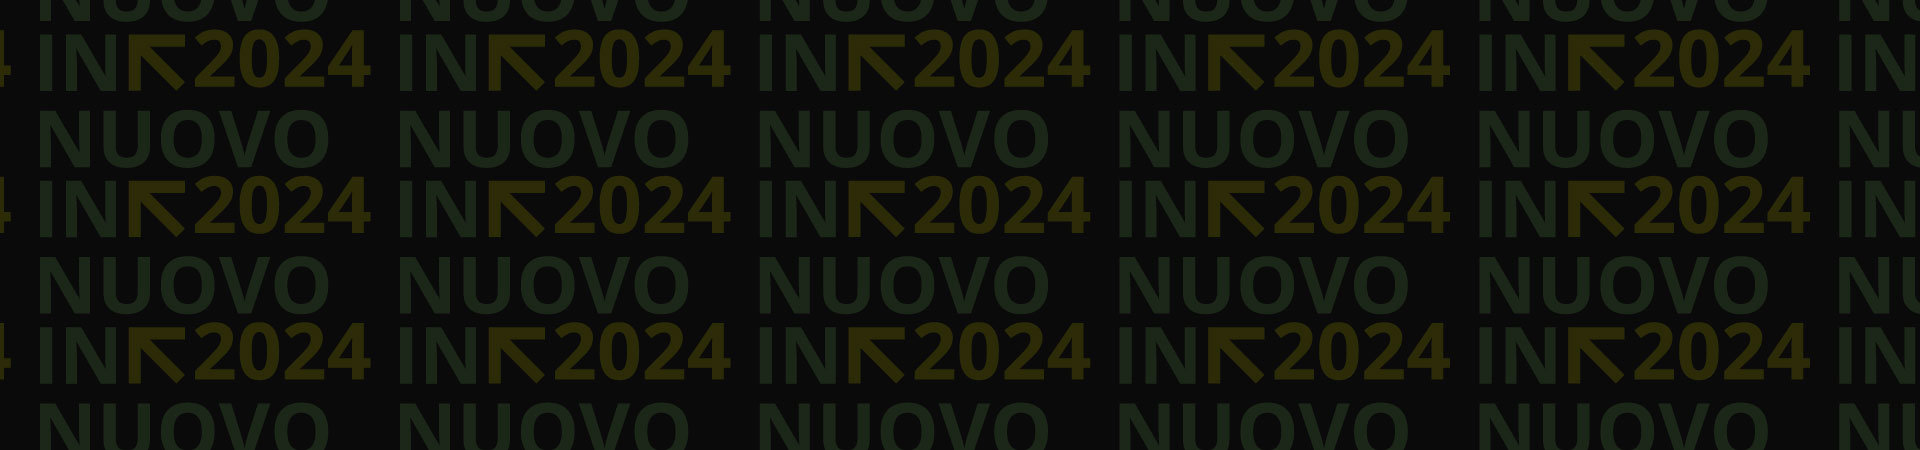 Nuovo In 2024